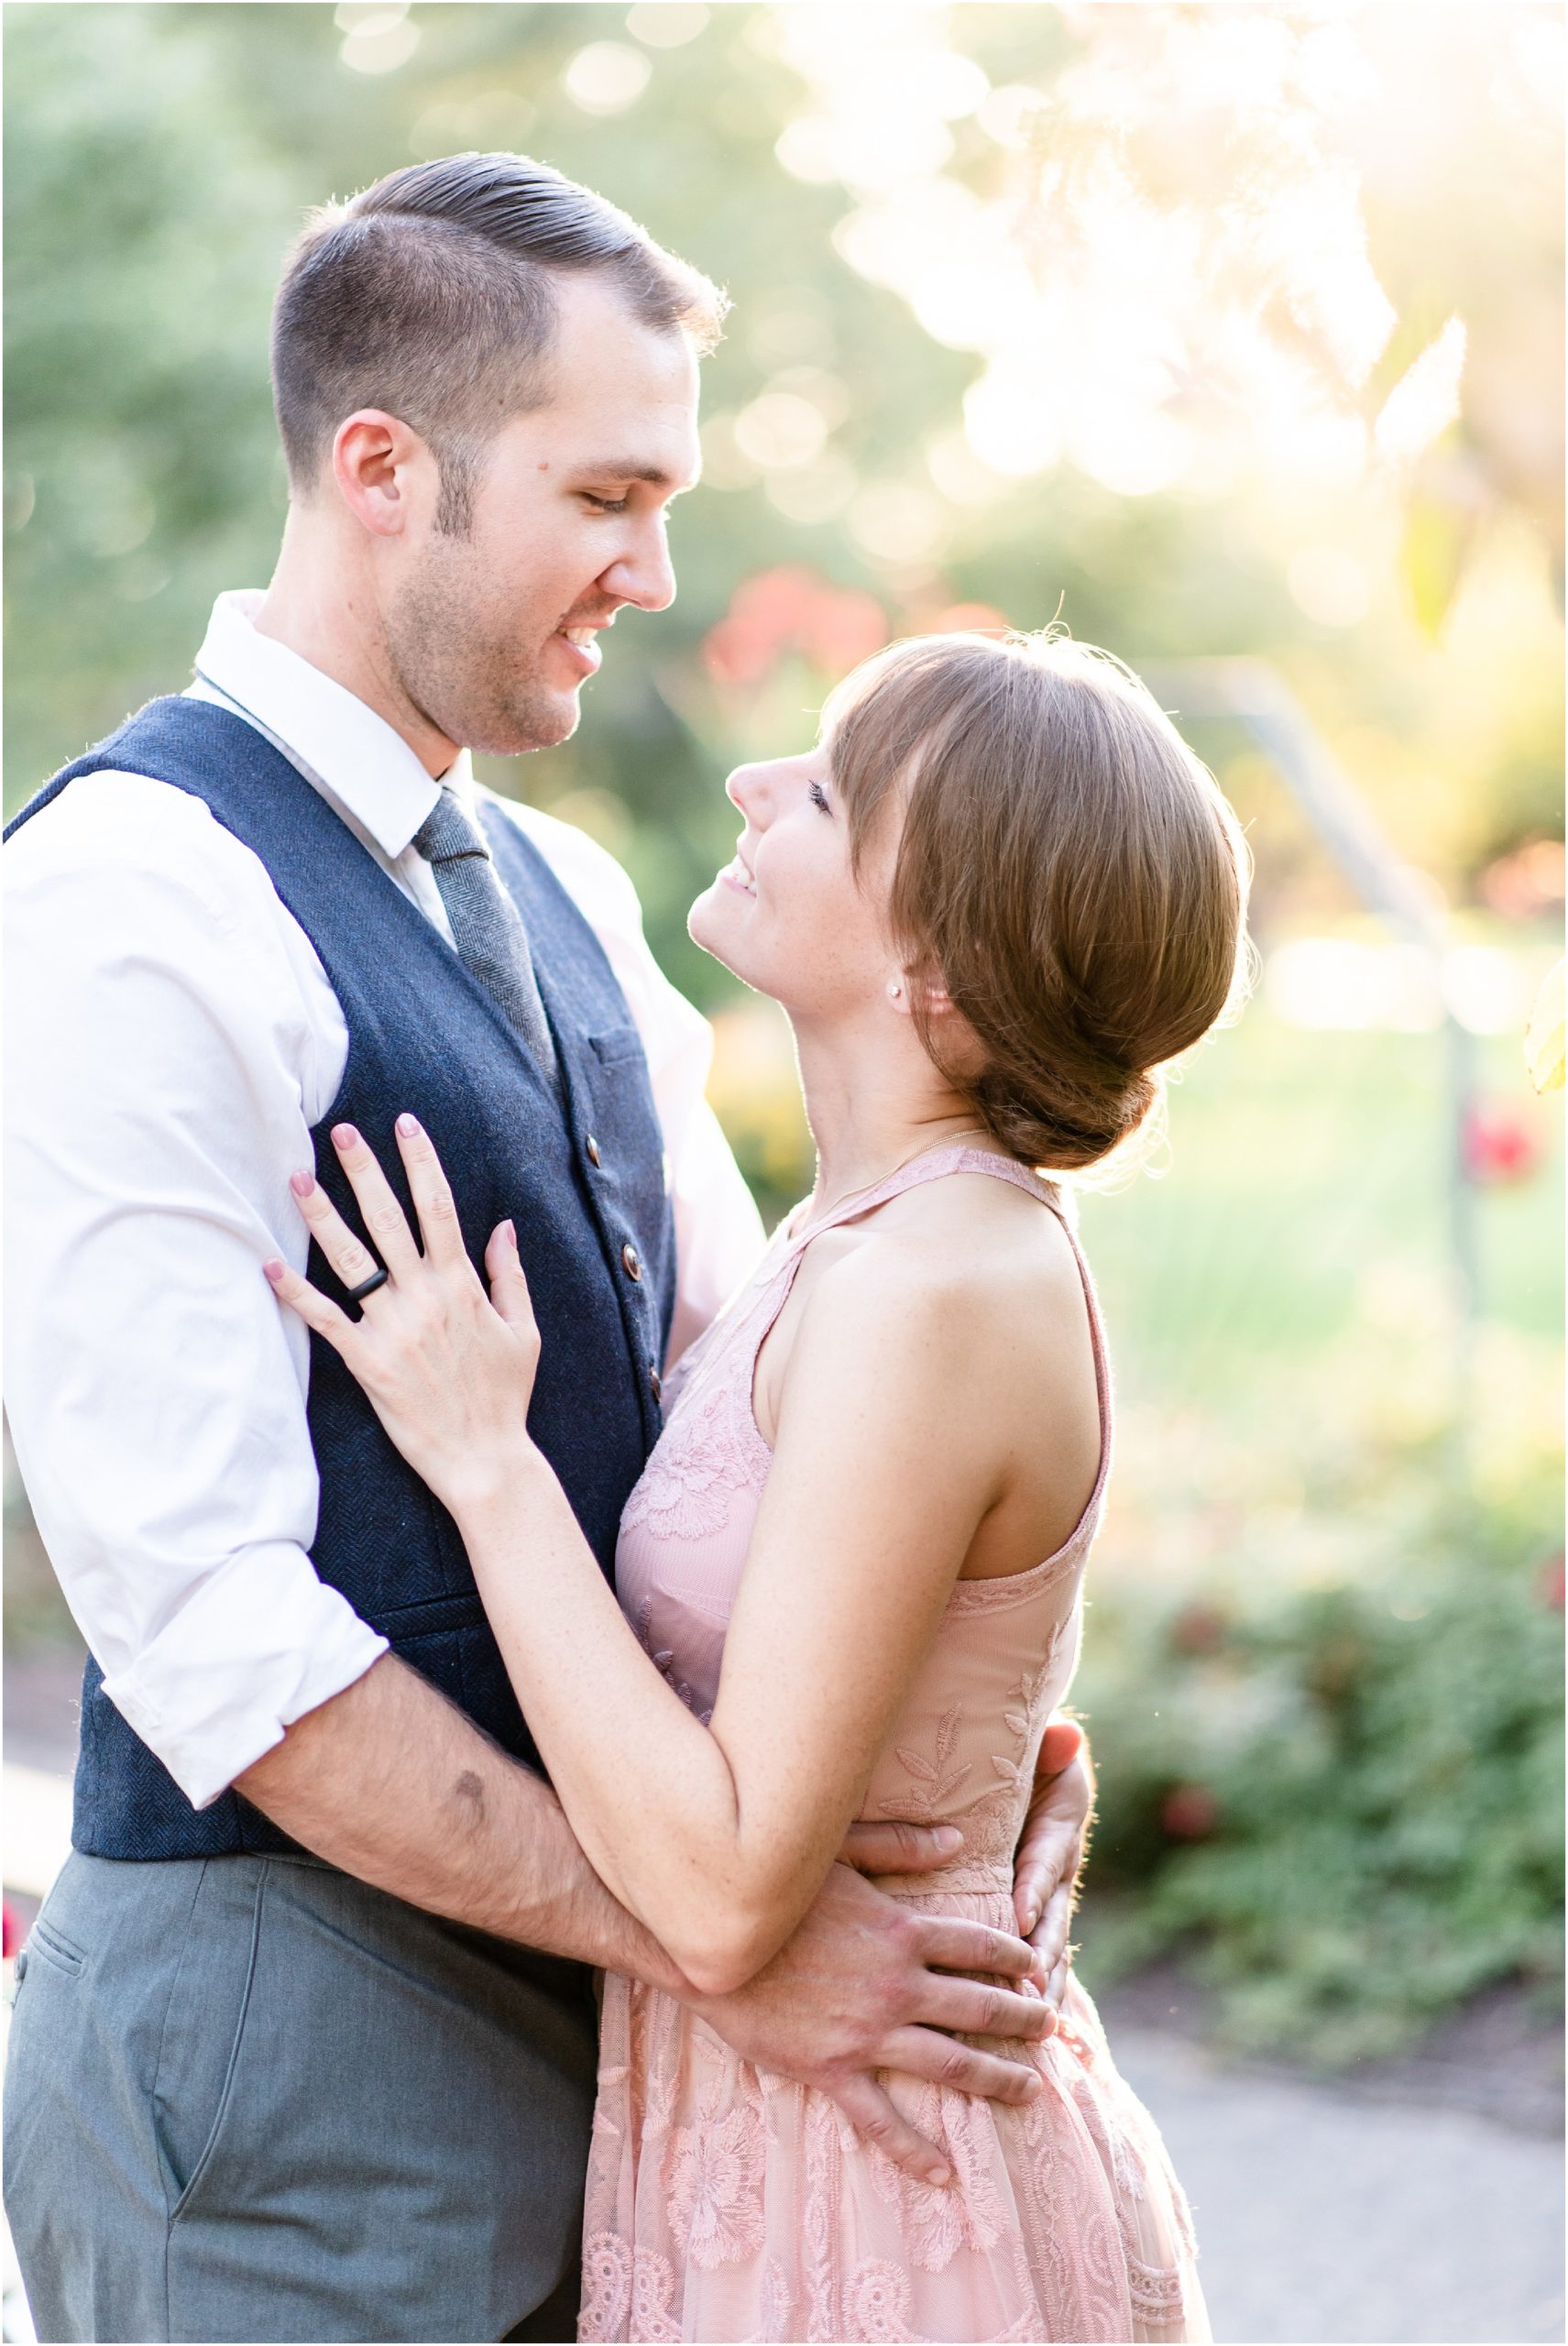 couple kissing in the sunlight glow at shelter gardens in columbia, mo during engagement session